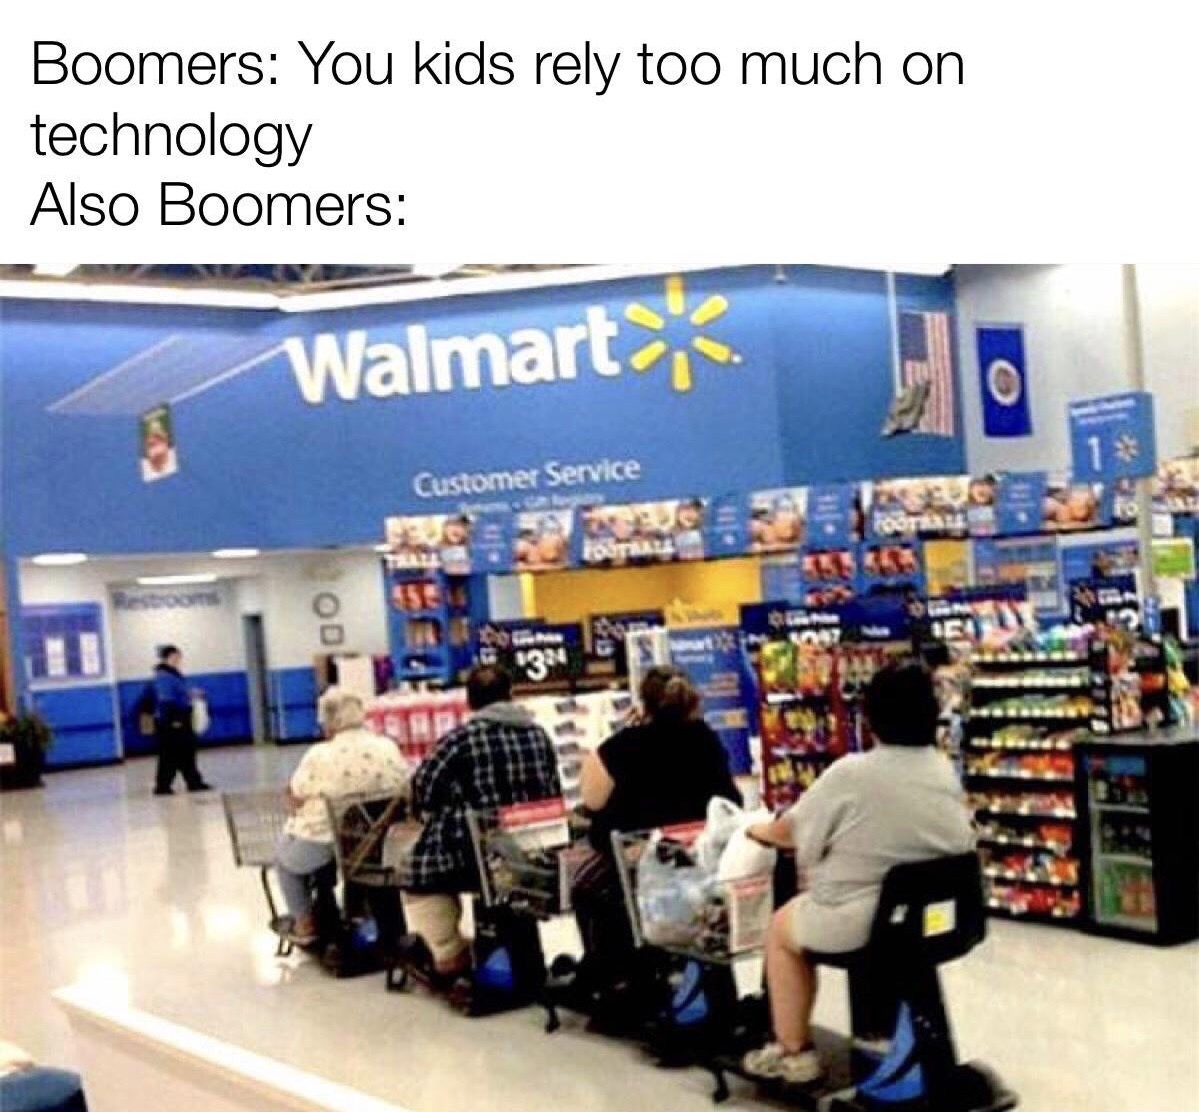 walmart customer service meme - Boomers You kids rely too much on technology Also Boomers Walmart, Customer Service 12